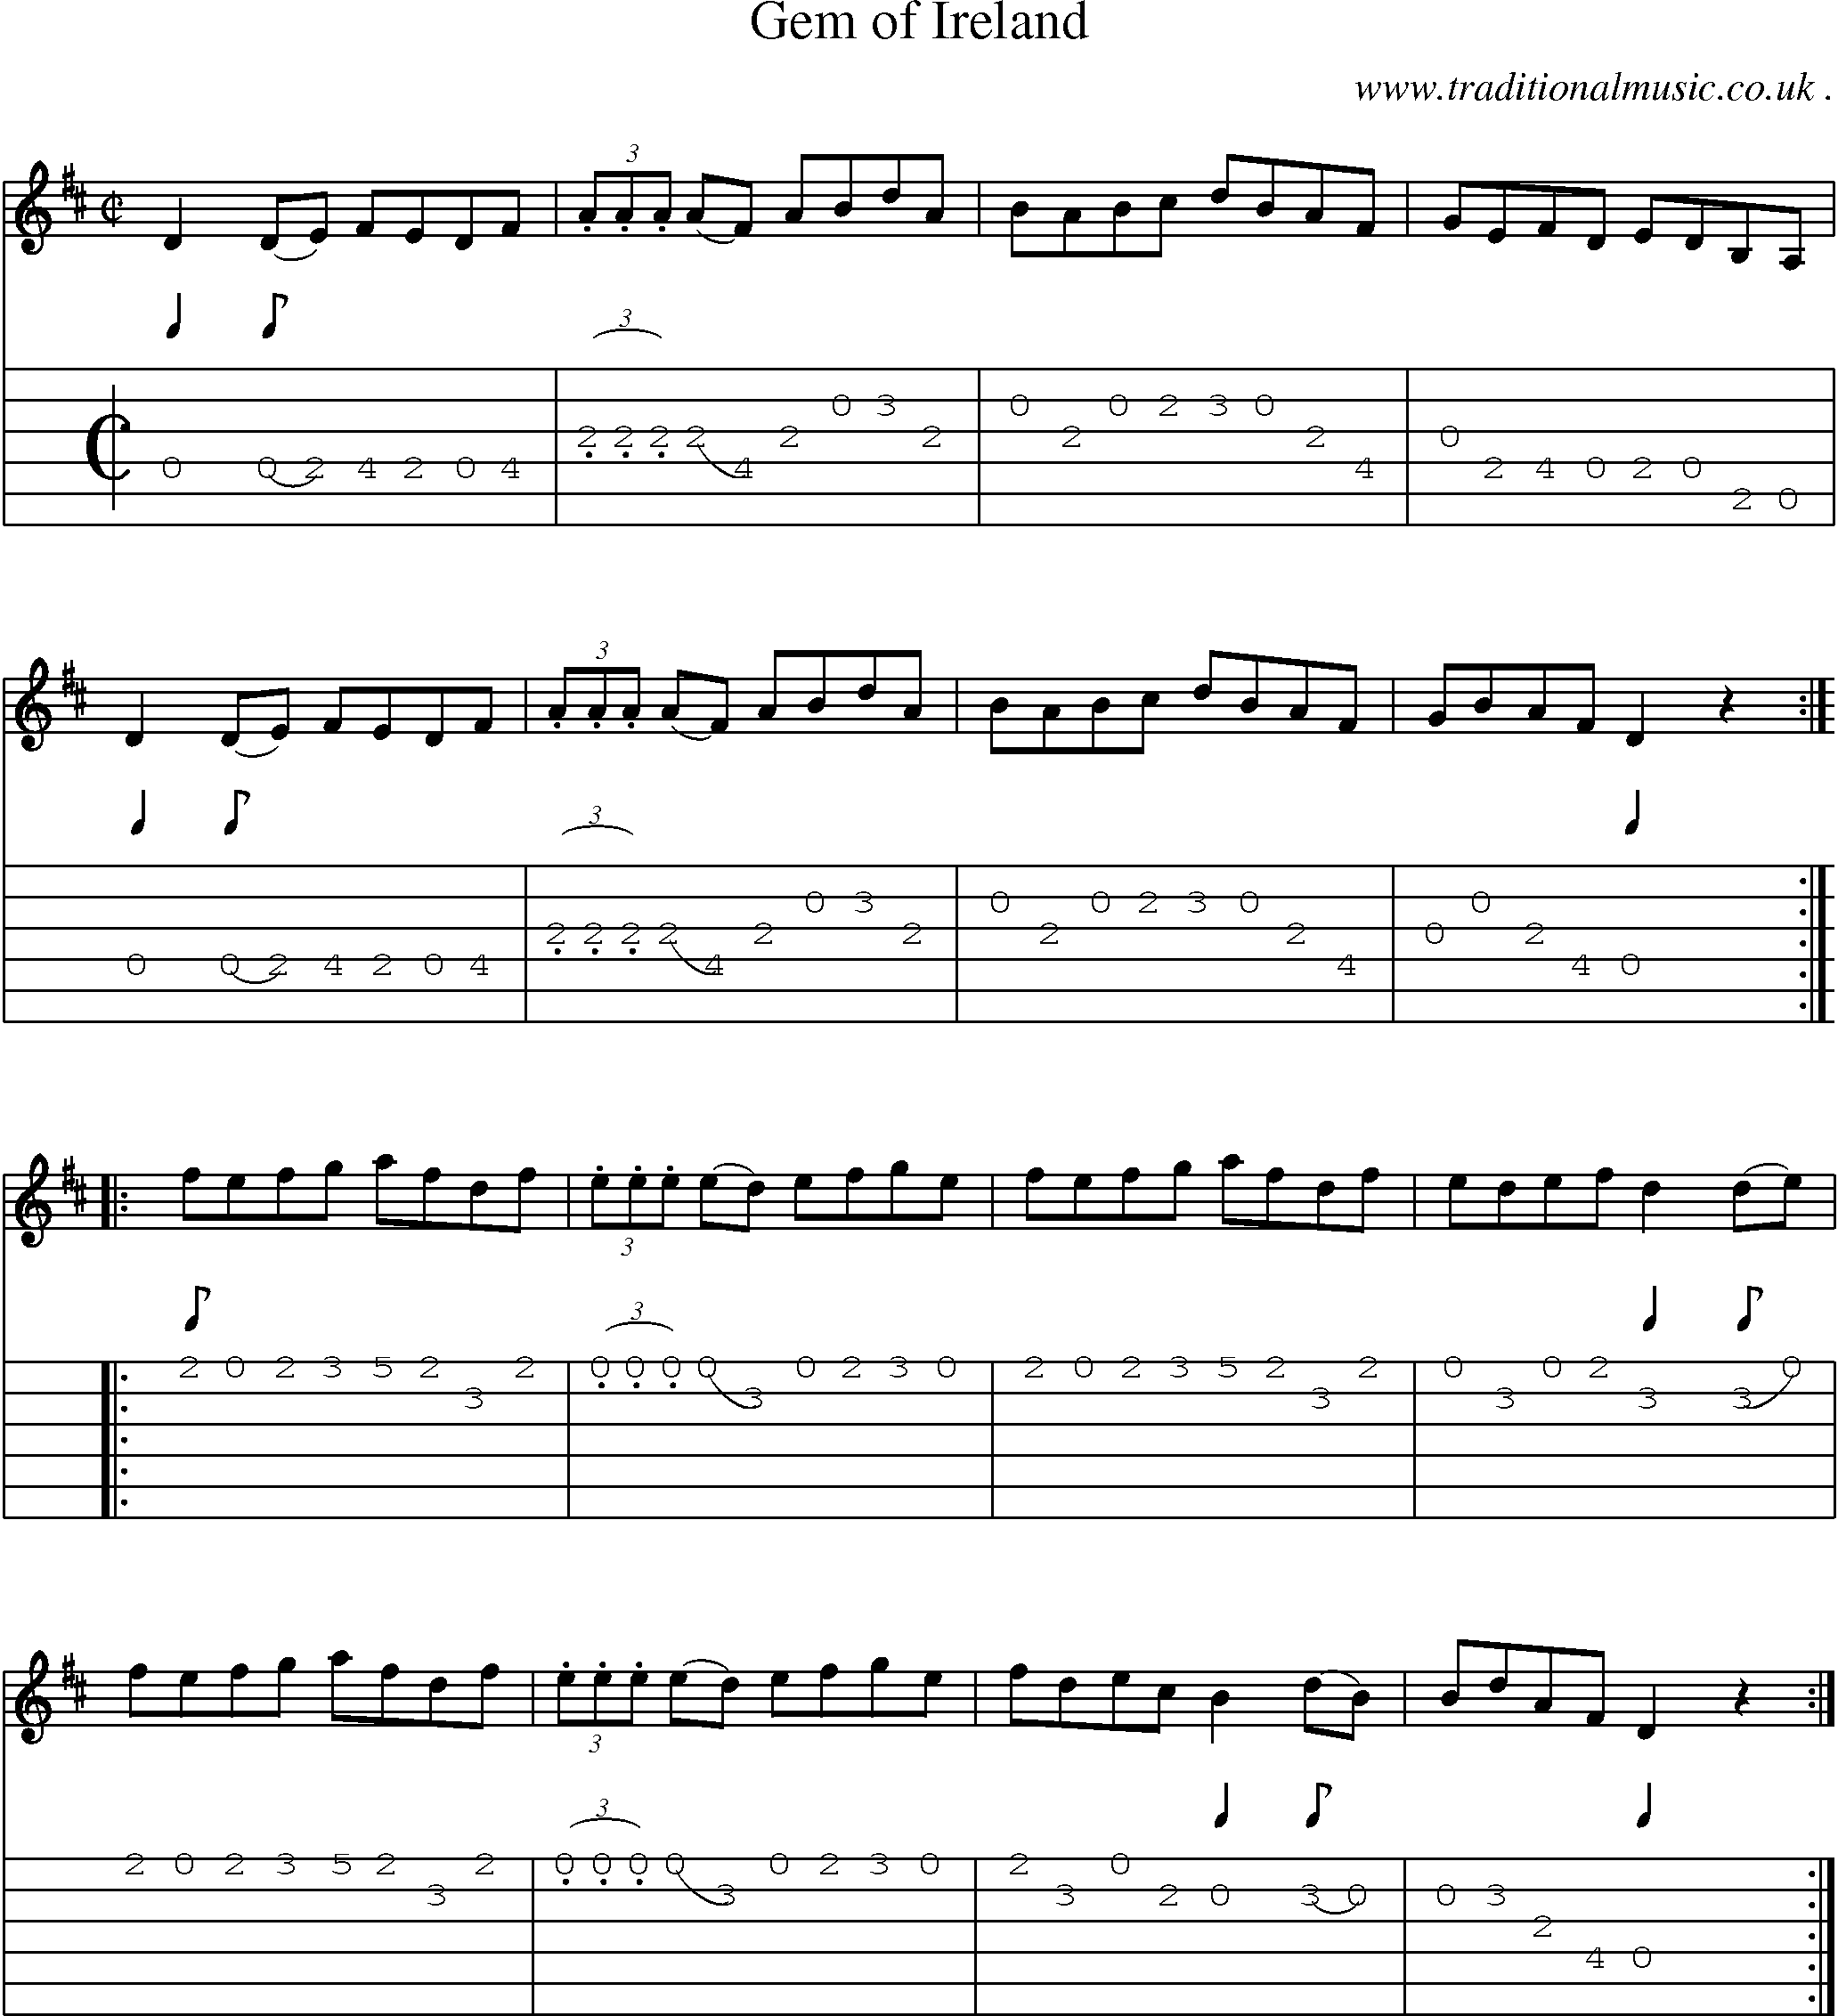 Sheet-Music and Guitar Tabs for Gem Of Ireland